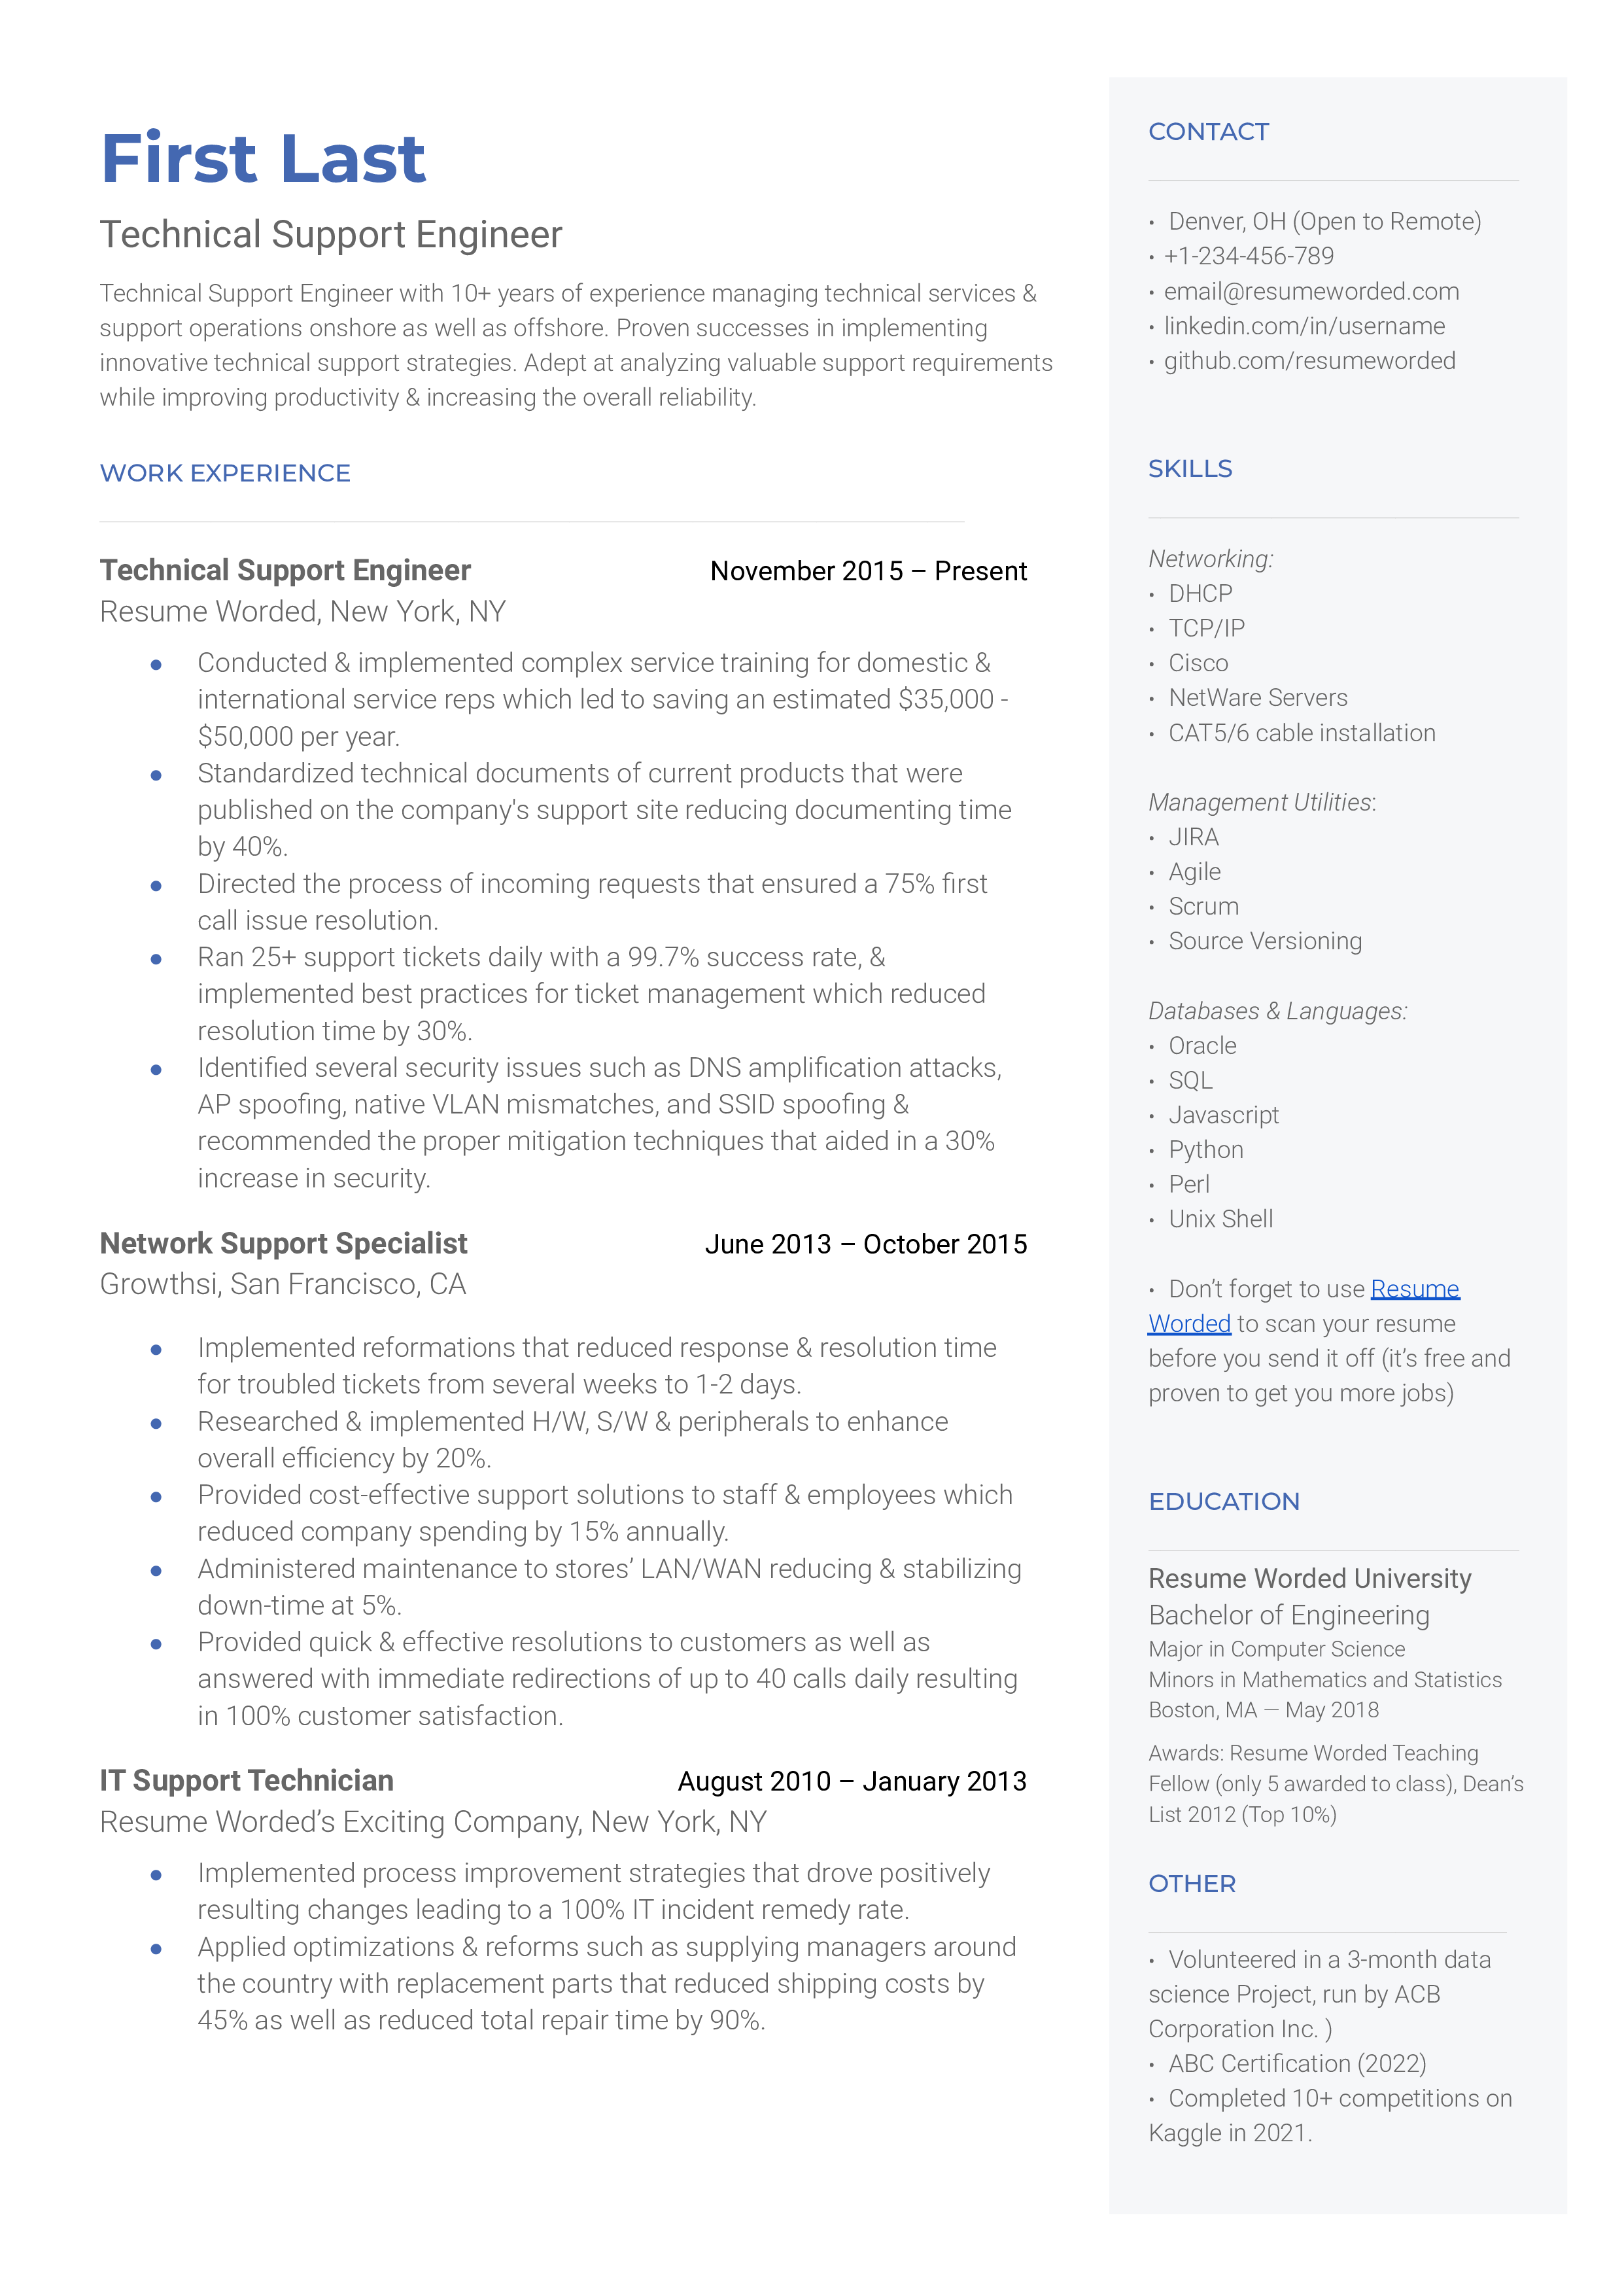 Technical Support Engineer Resume Template + Example